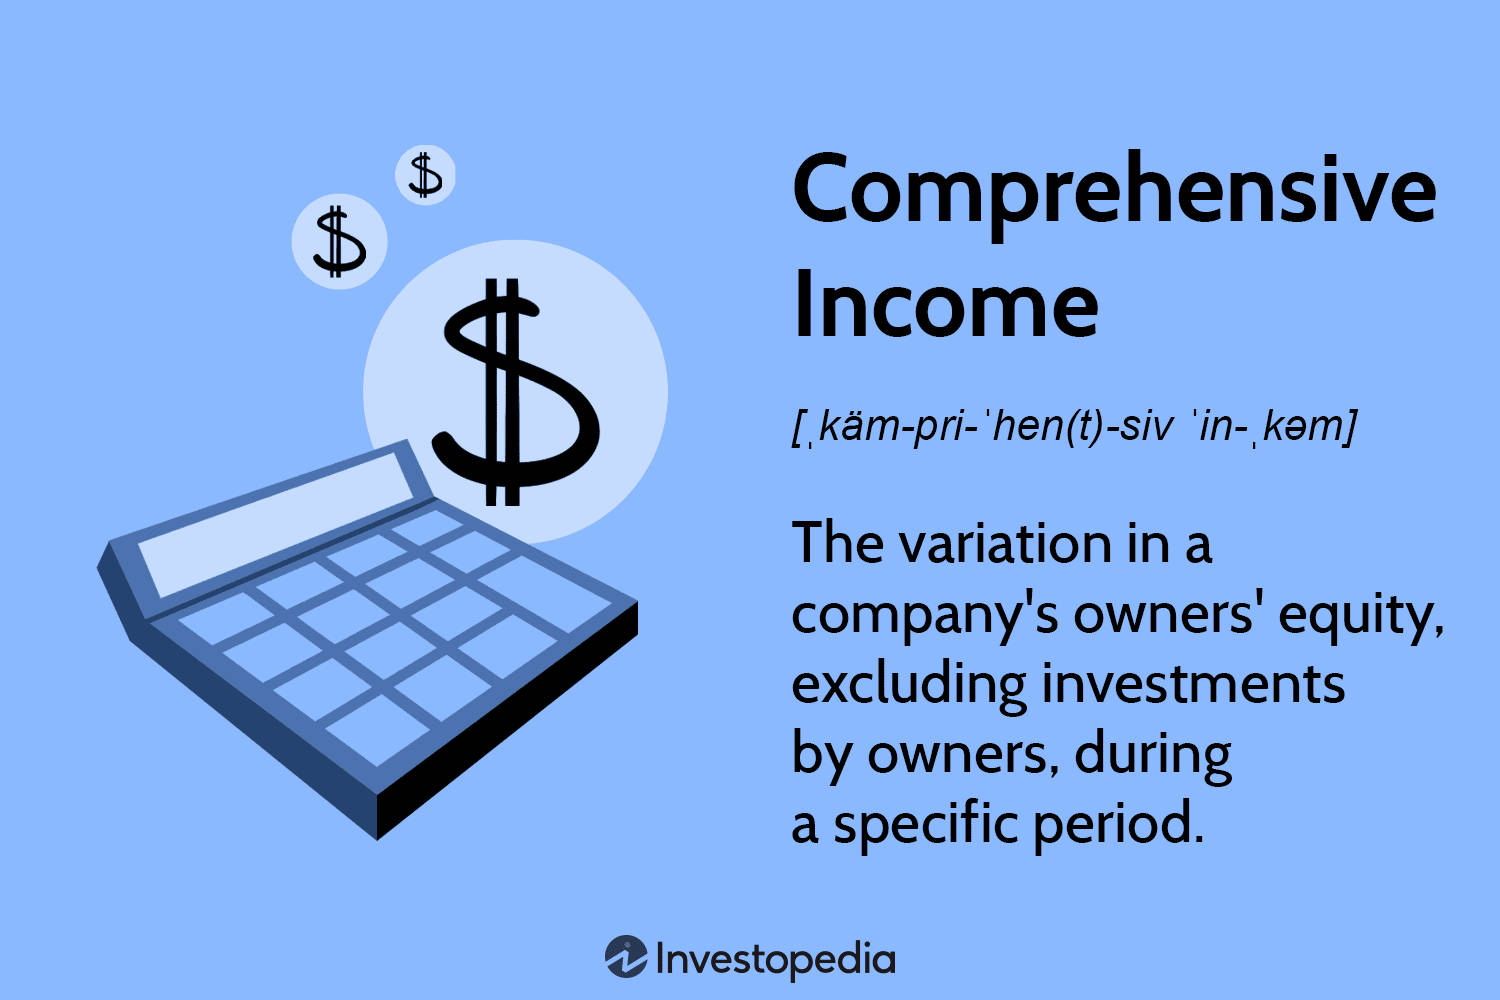 Financial Data Analysis for Comprehensive Income Wallpaper